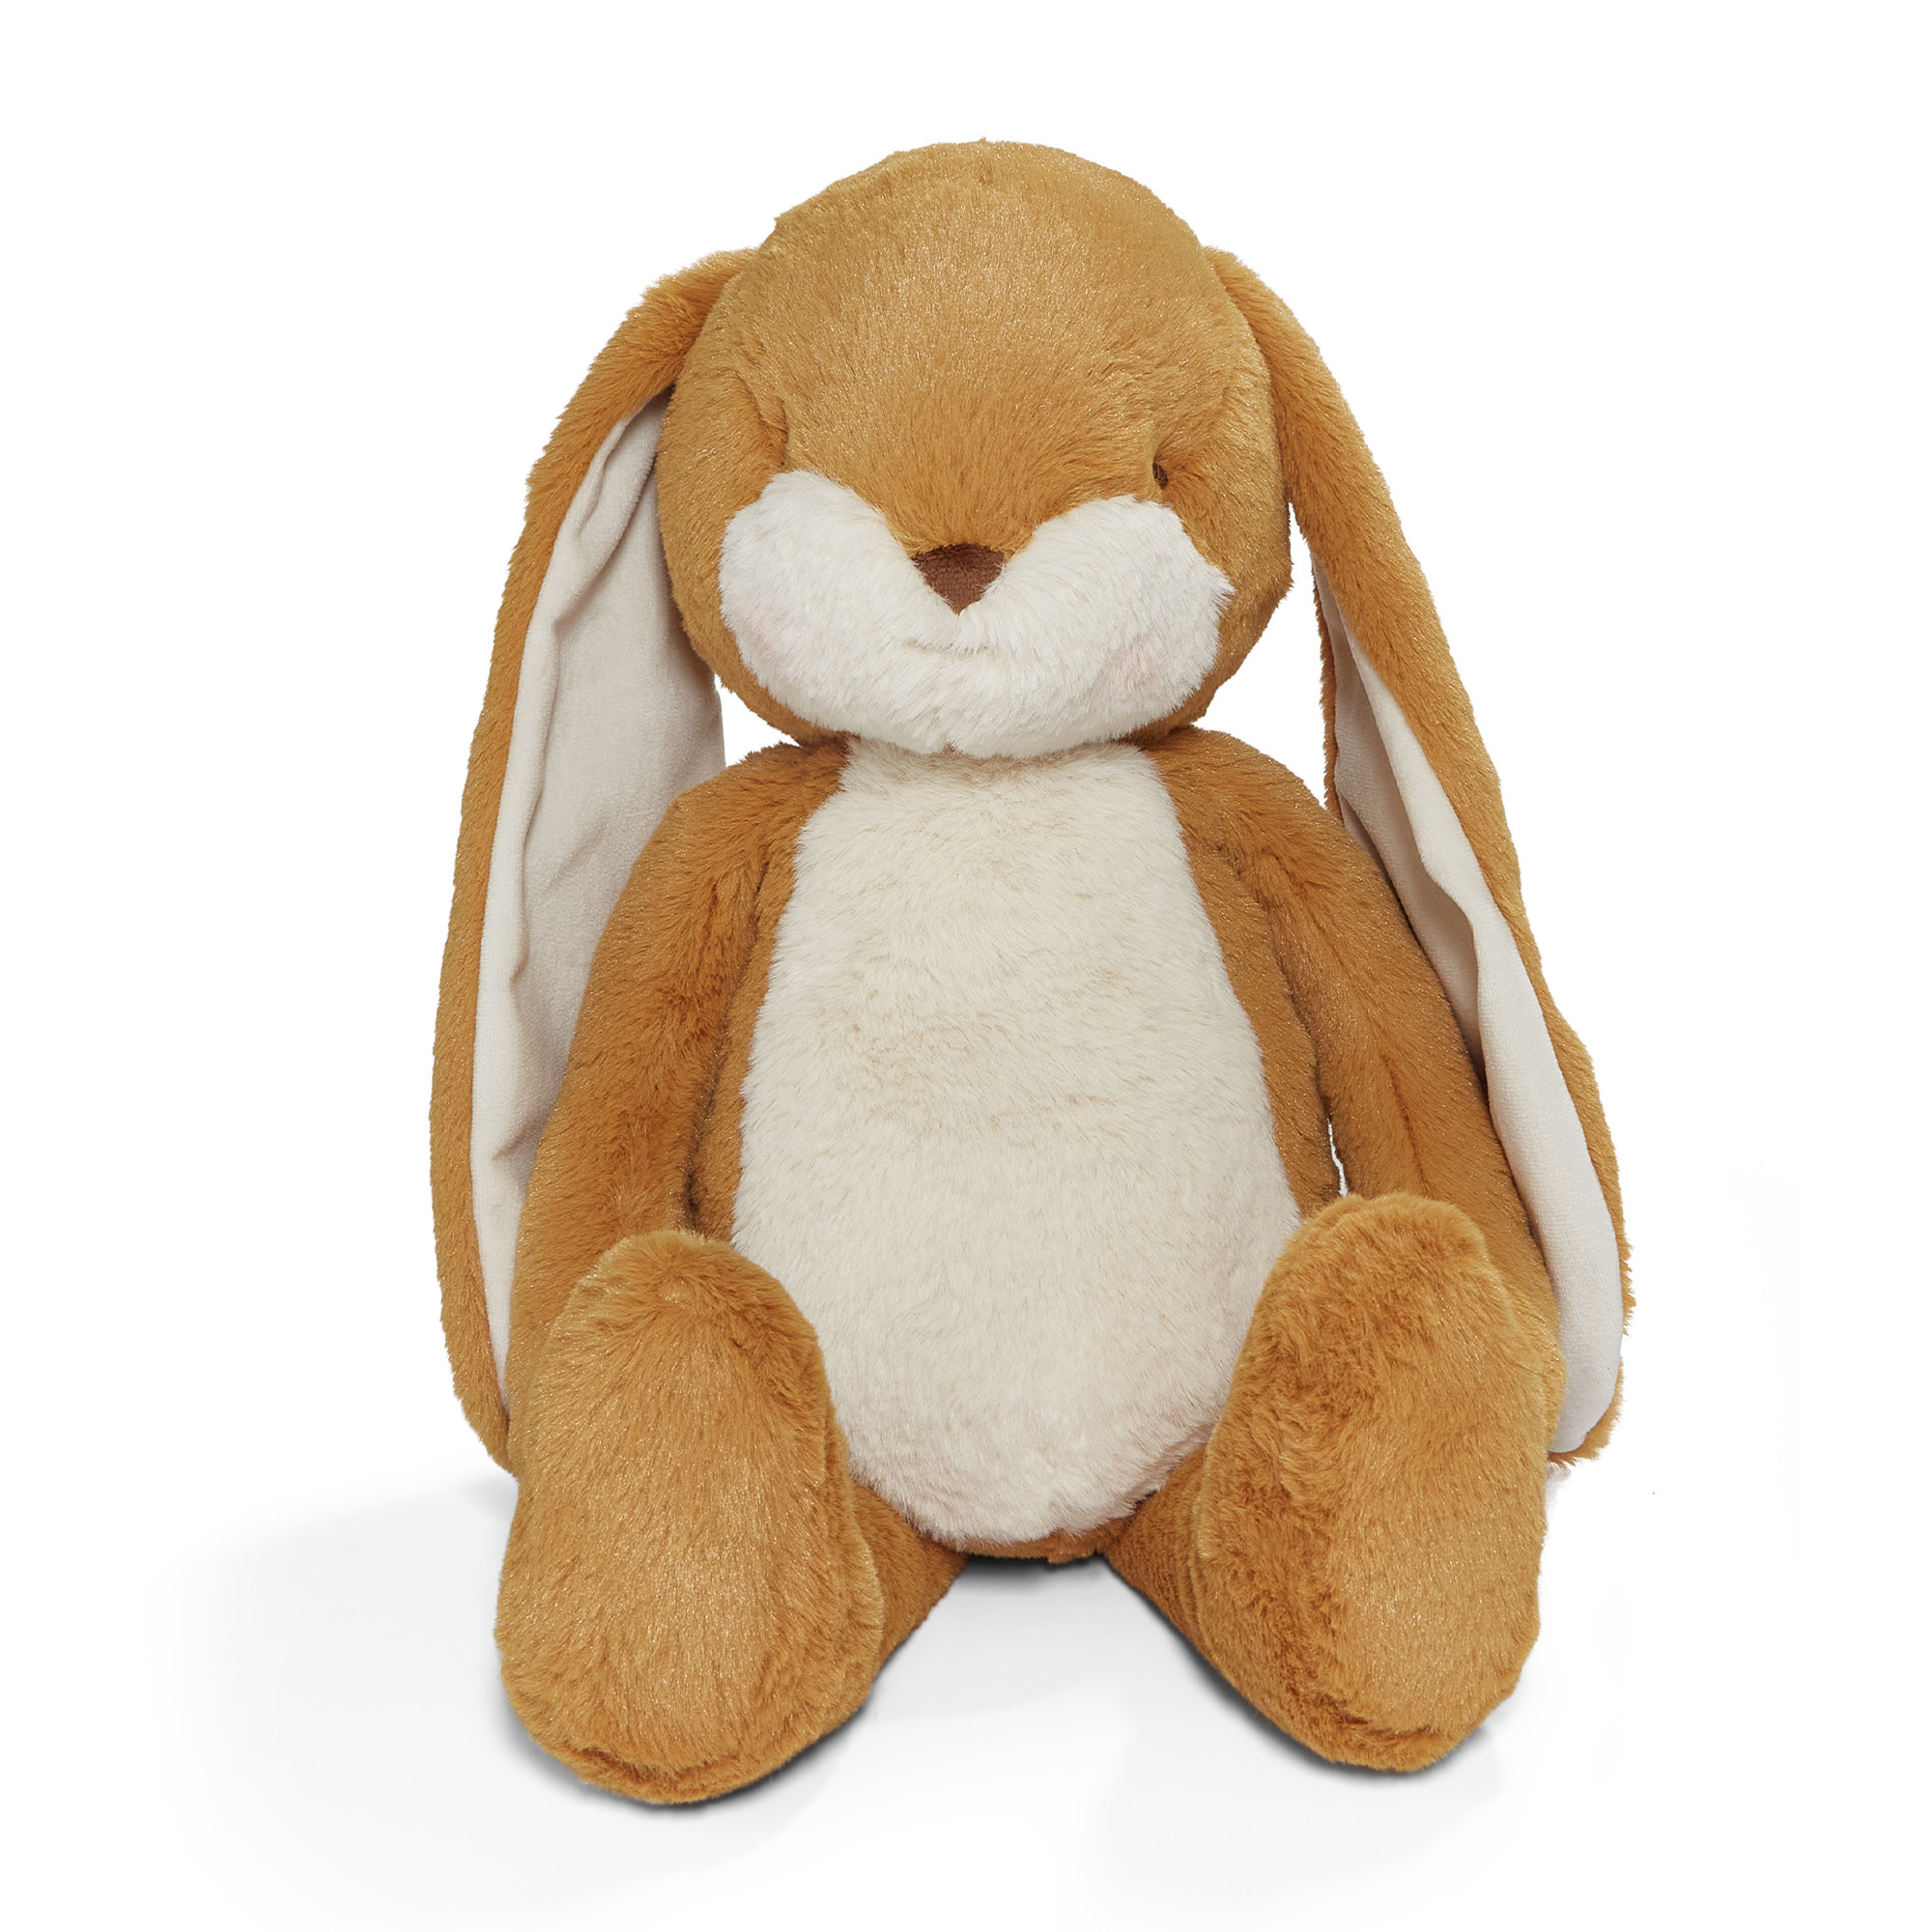 Peluche big nibble flopy marigold 50cm - Bunnies By The Bay